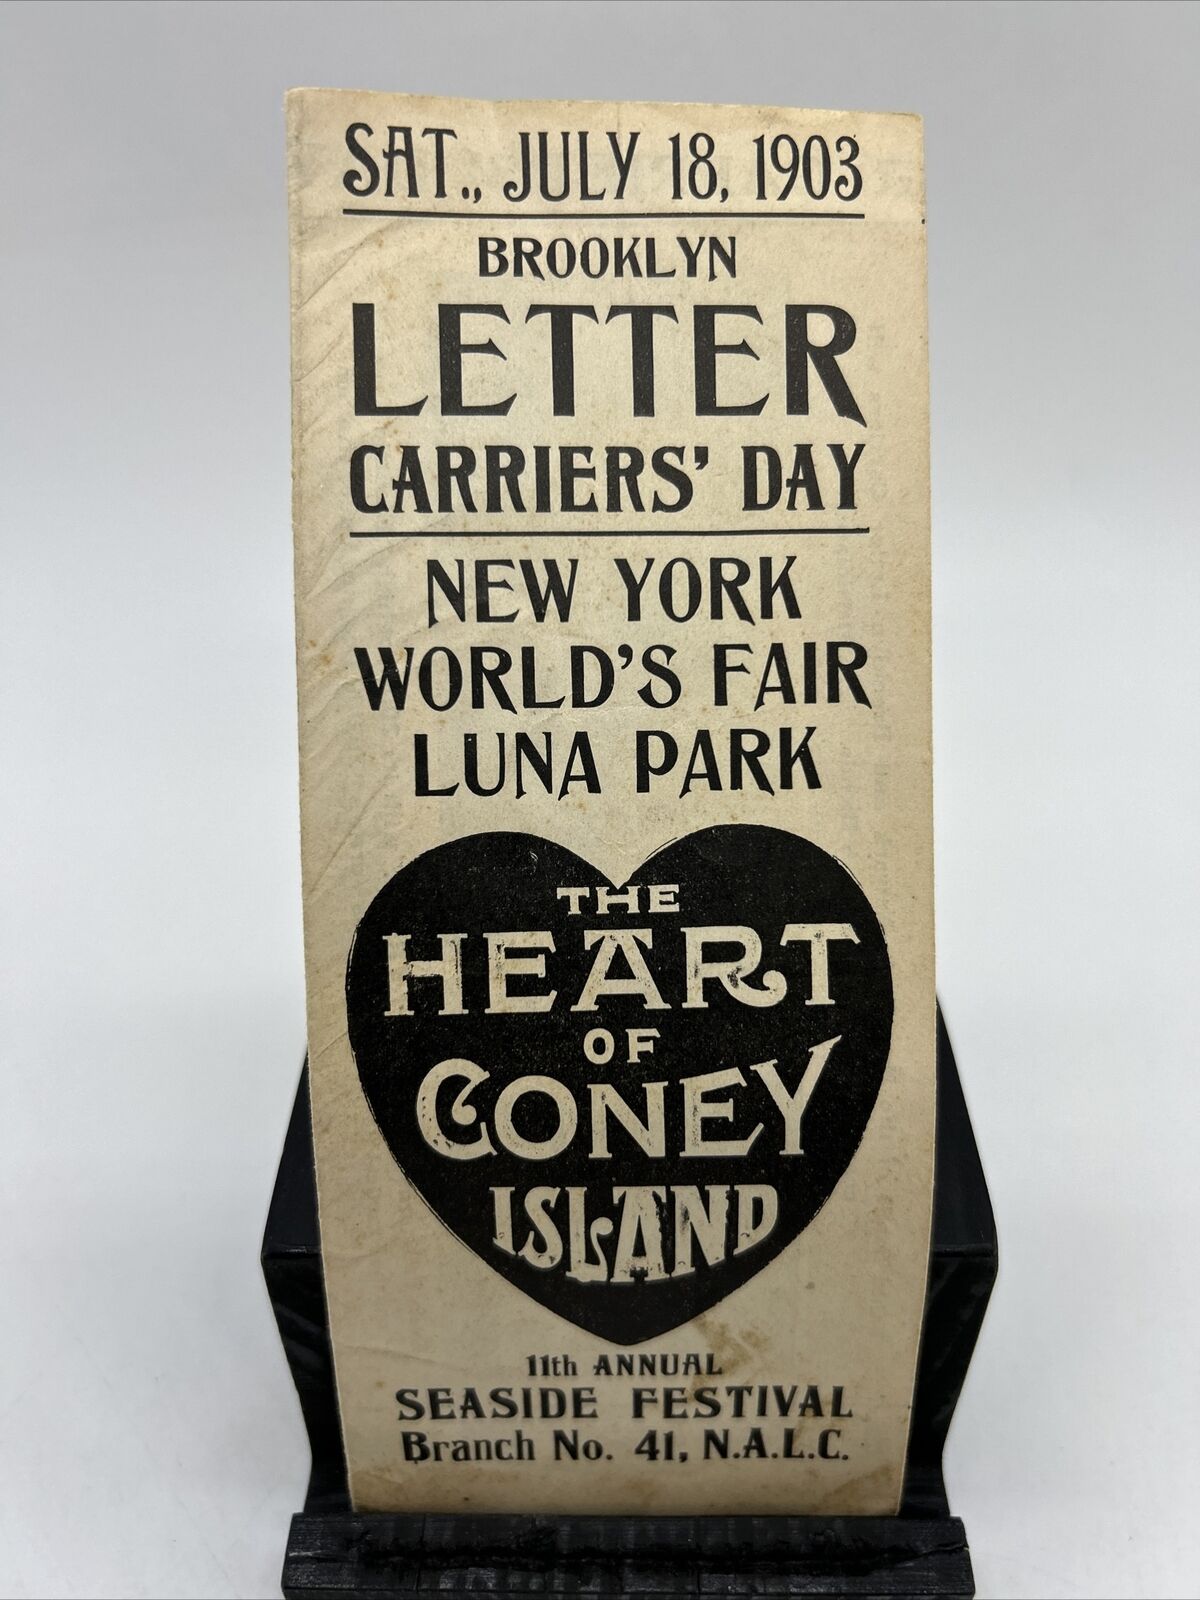 1903 New York World’s Fair Luna Park Letter Carriers’ Day 11th Branch Panflet